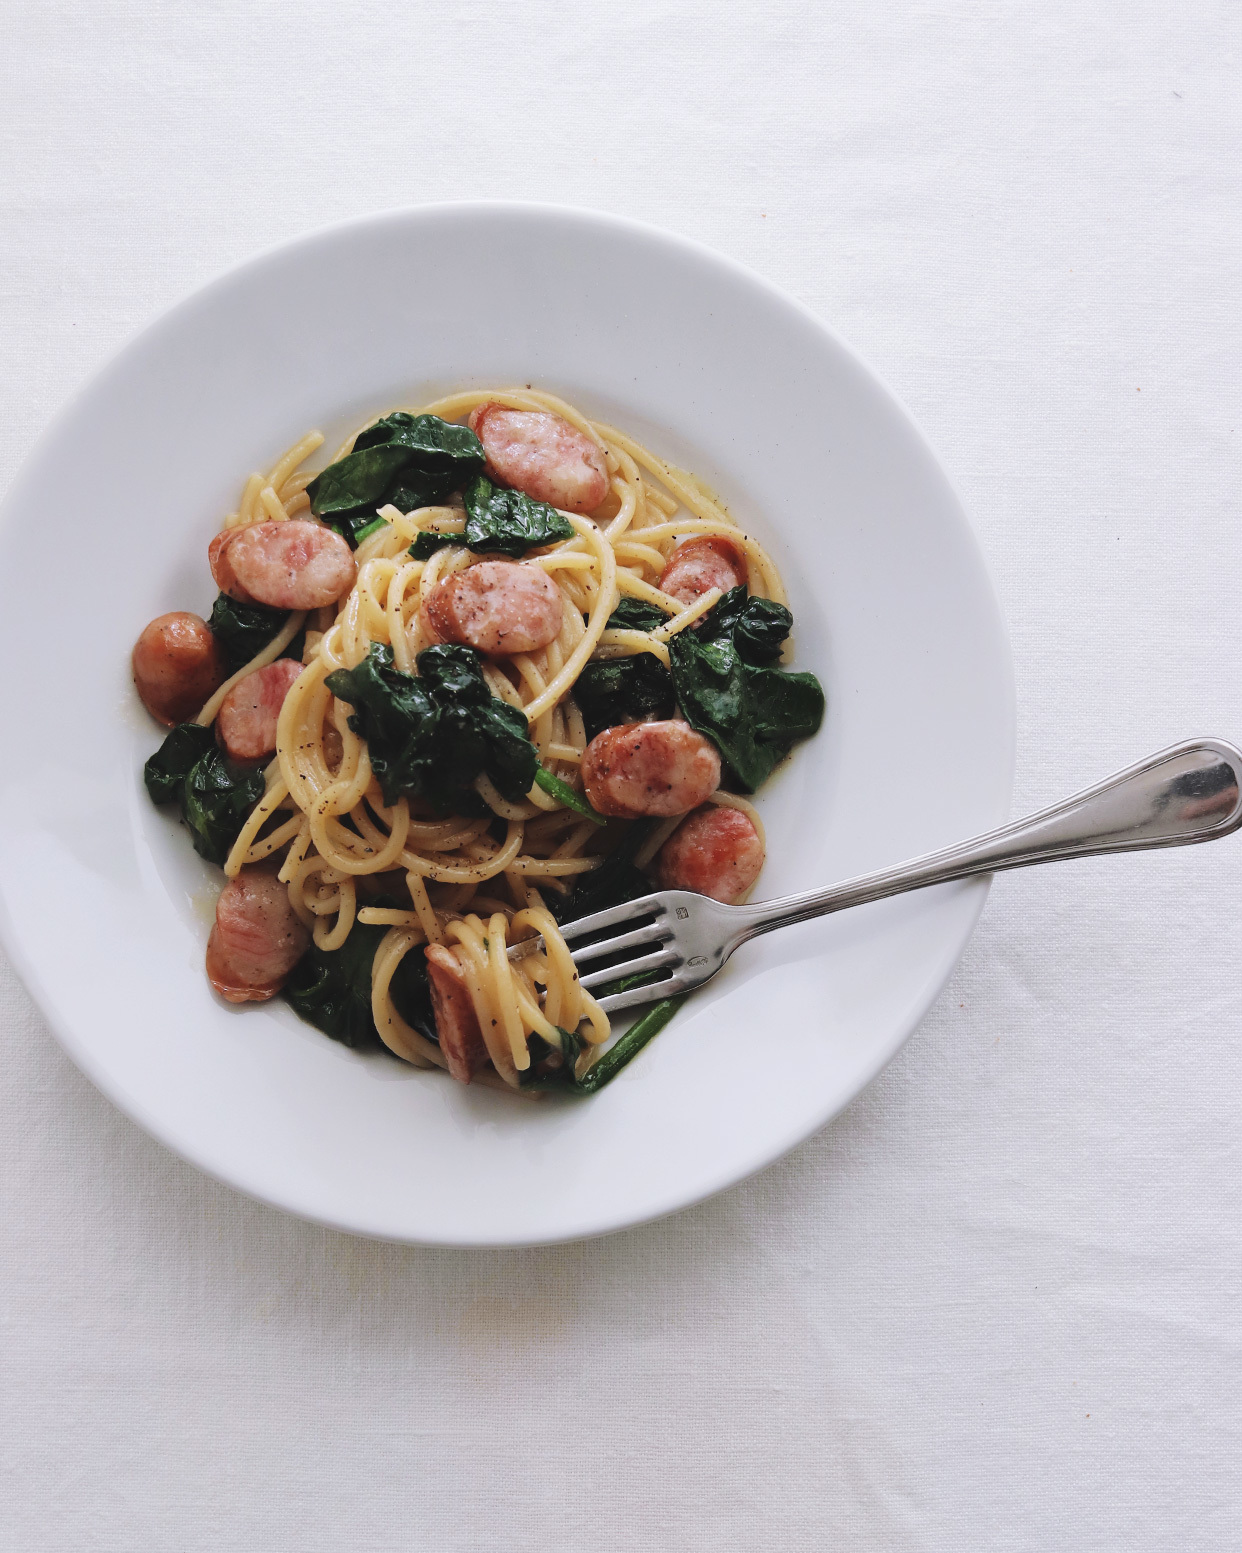 Pasta with Spinach & Sausage in Japanese sauce﻿